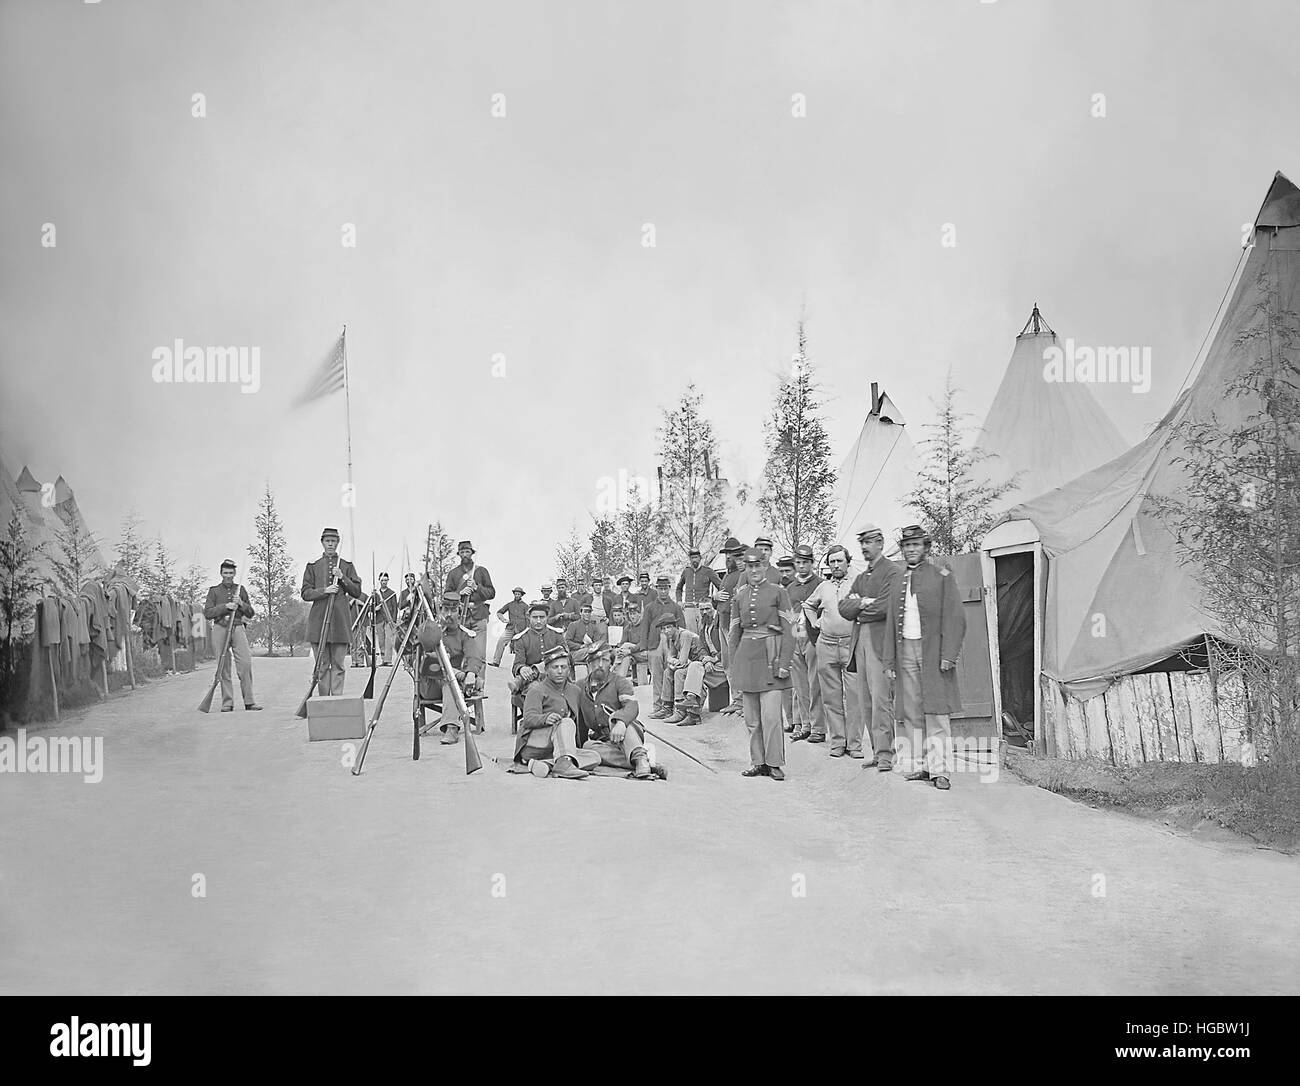 Military camp with soliders in street during the American Civil War. Stock Photo